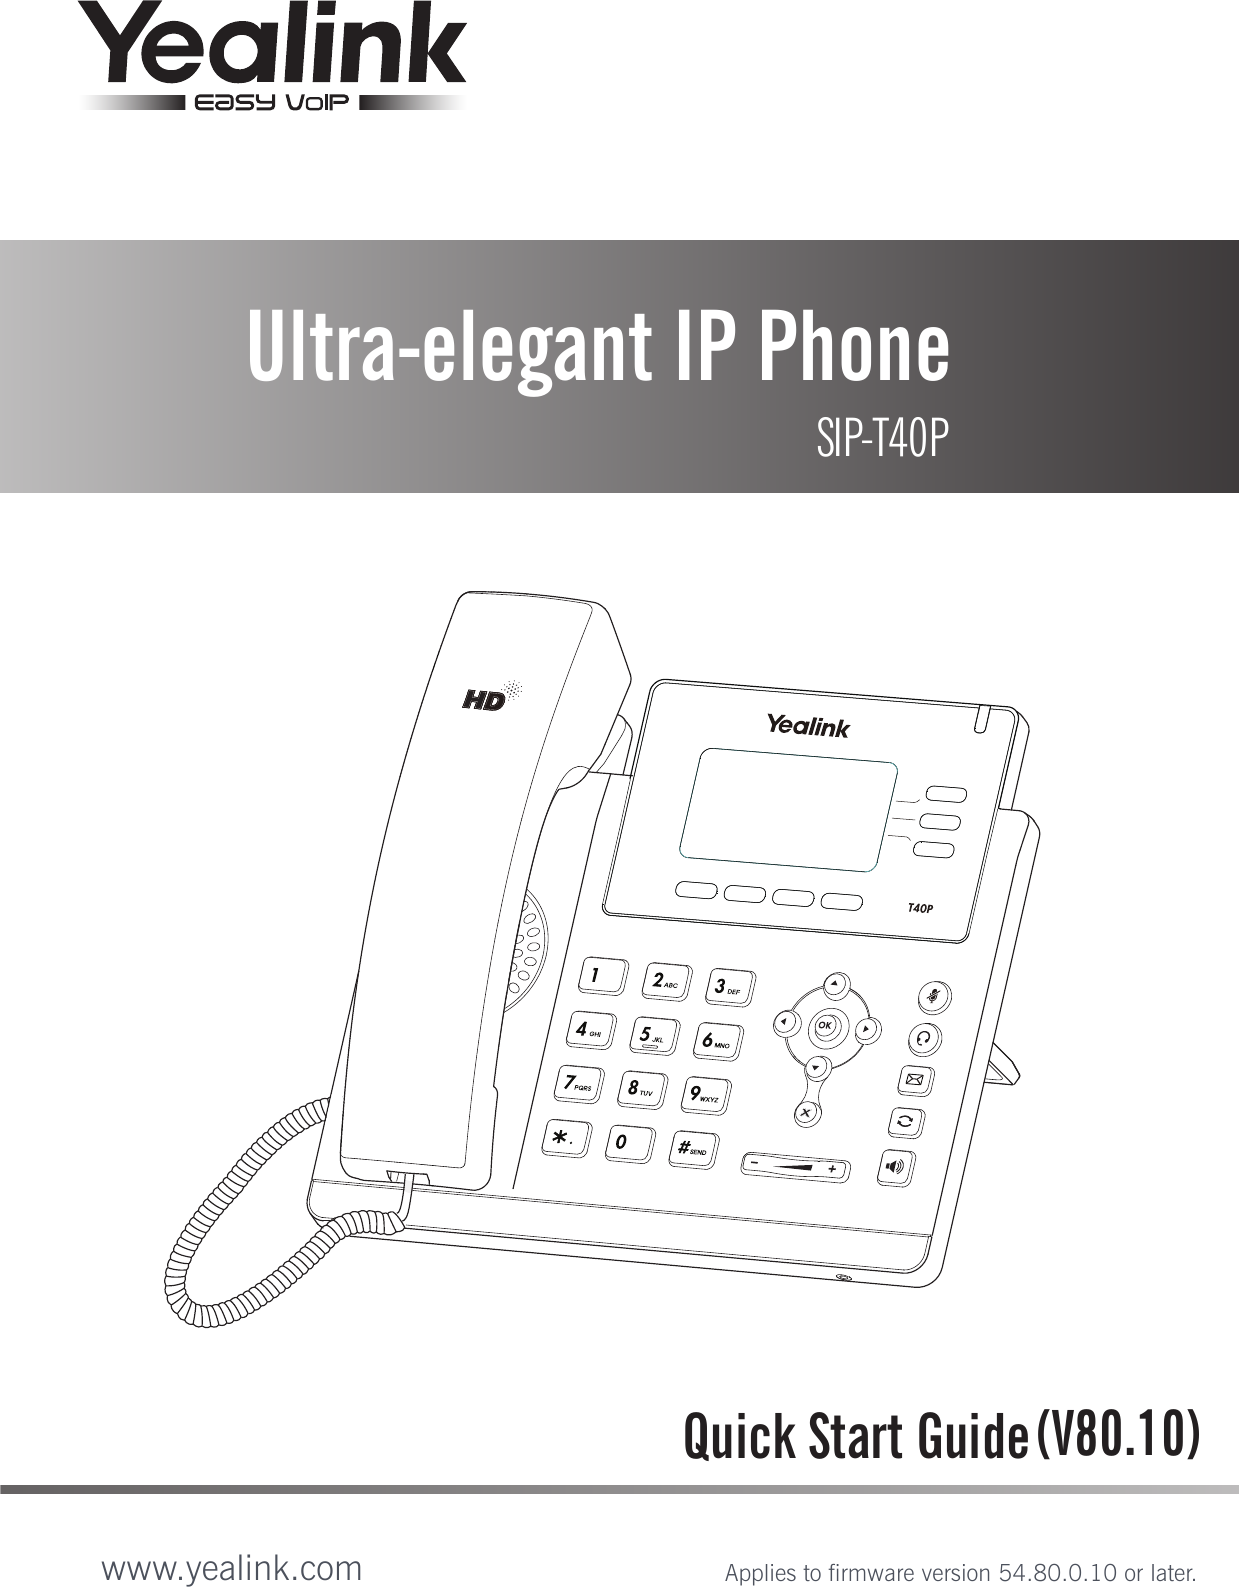 Ultra-elegant IP Phone SIP-T40PQuick Start Guidewww.yealink.com Applies to firmware version 54.80.0.10 or later.(V80.10)